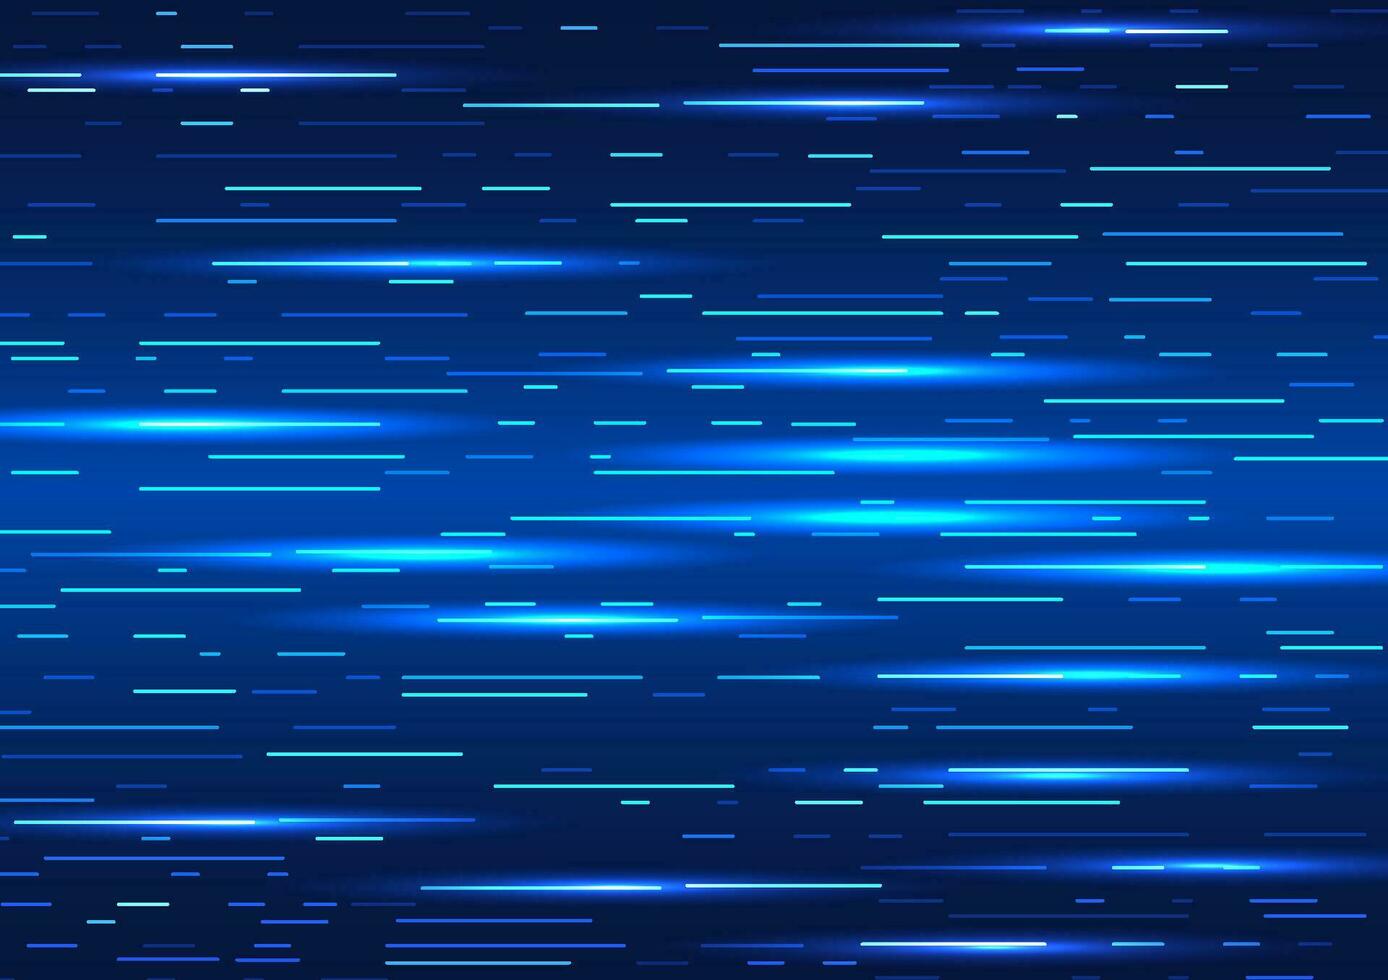 Abstract technology background uses longitudinal lines with an interesting increase in the brightness of the lines. Refers to the speed of data transfer of technology. Focus on dark blue tones. vector